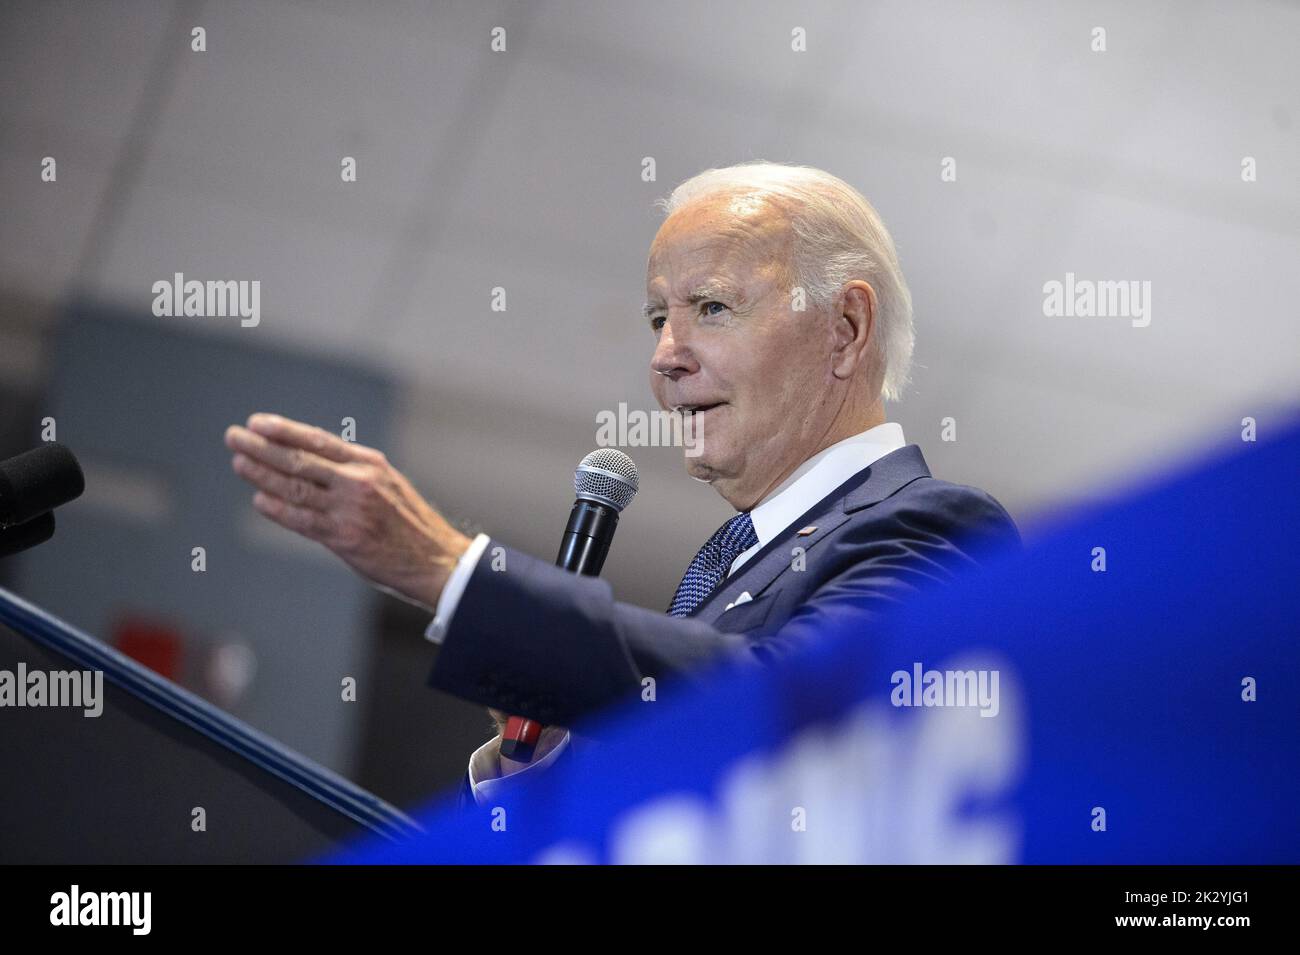 Washington, United States. 23rd Sep, 2022. President Joe Biden speaks during a Democratic National Committee event at the headquarters of the National Education Association in Washington, DC on Friday, September 23, 2022. The president urged supporters to vote in the upcoming midterm elections this November. Photo by Bonnie Cash/UPI Credit: UPI/Alamy Live News Stock Photo